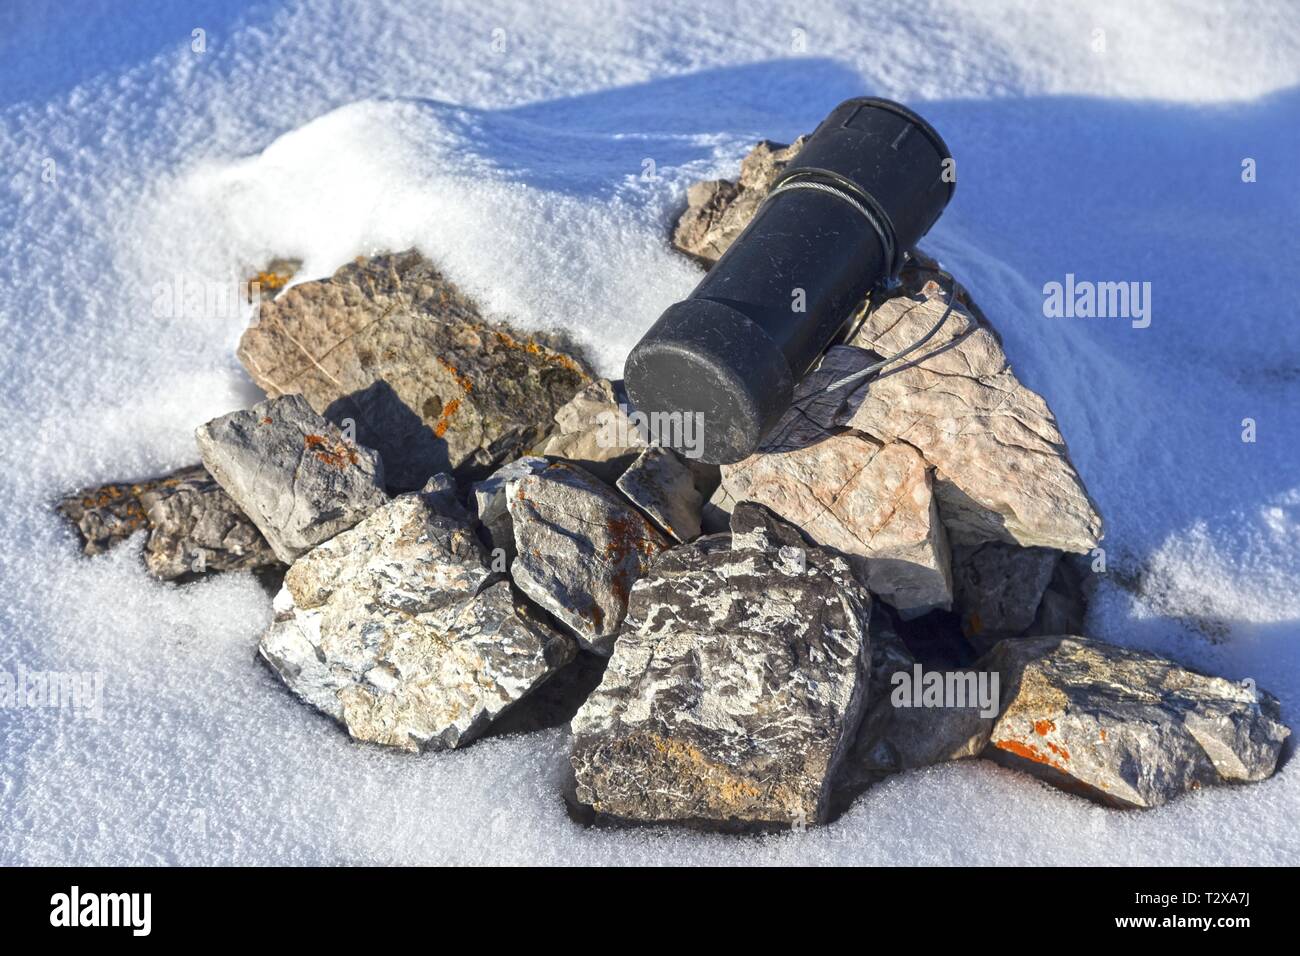 Weathered Black Metal Cylinder Steel Cable. Traditional Climber Register Cairn Rock Pile. Rocky Mountain Peak Summit Snow Canadian Rockies Stock Photo